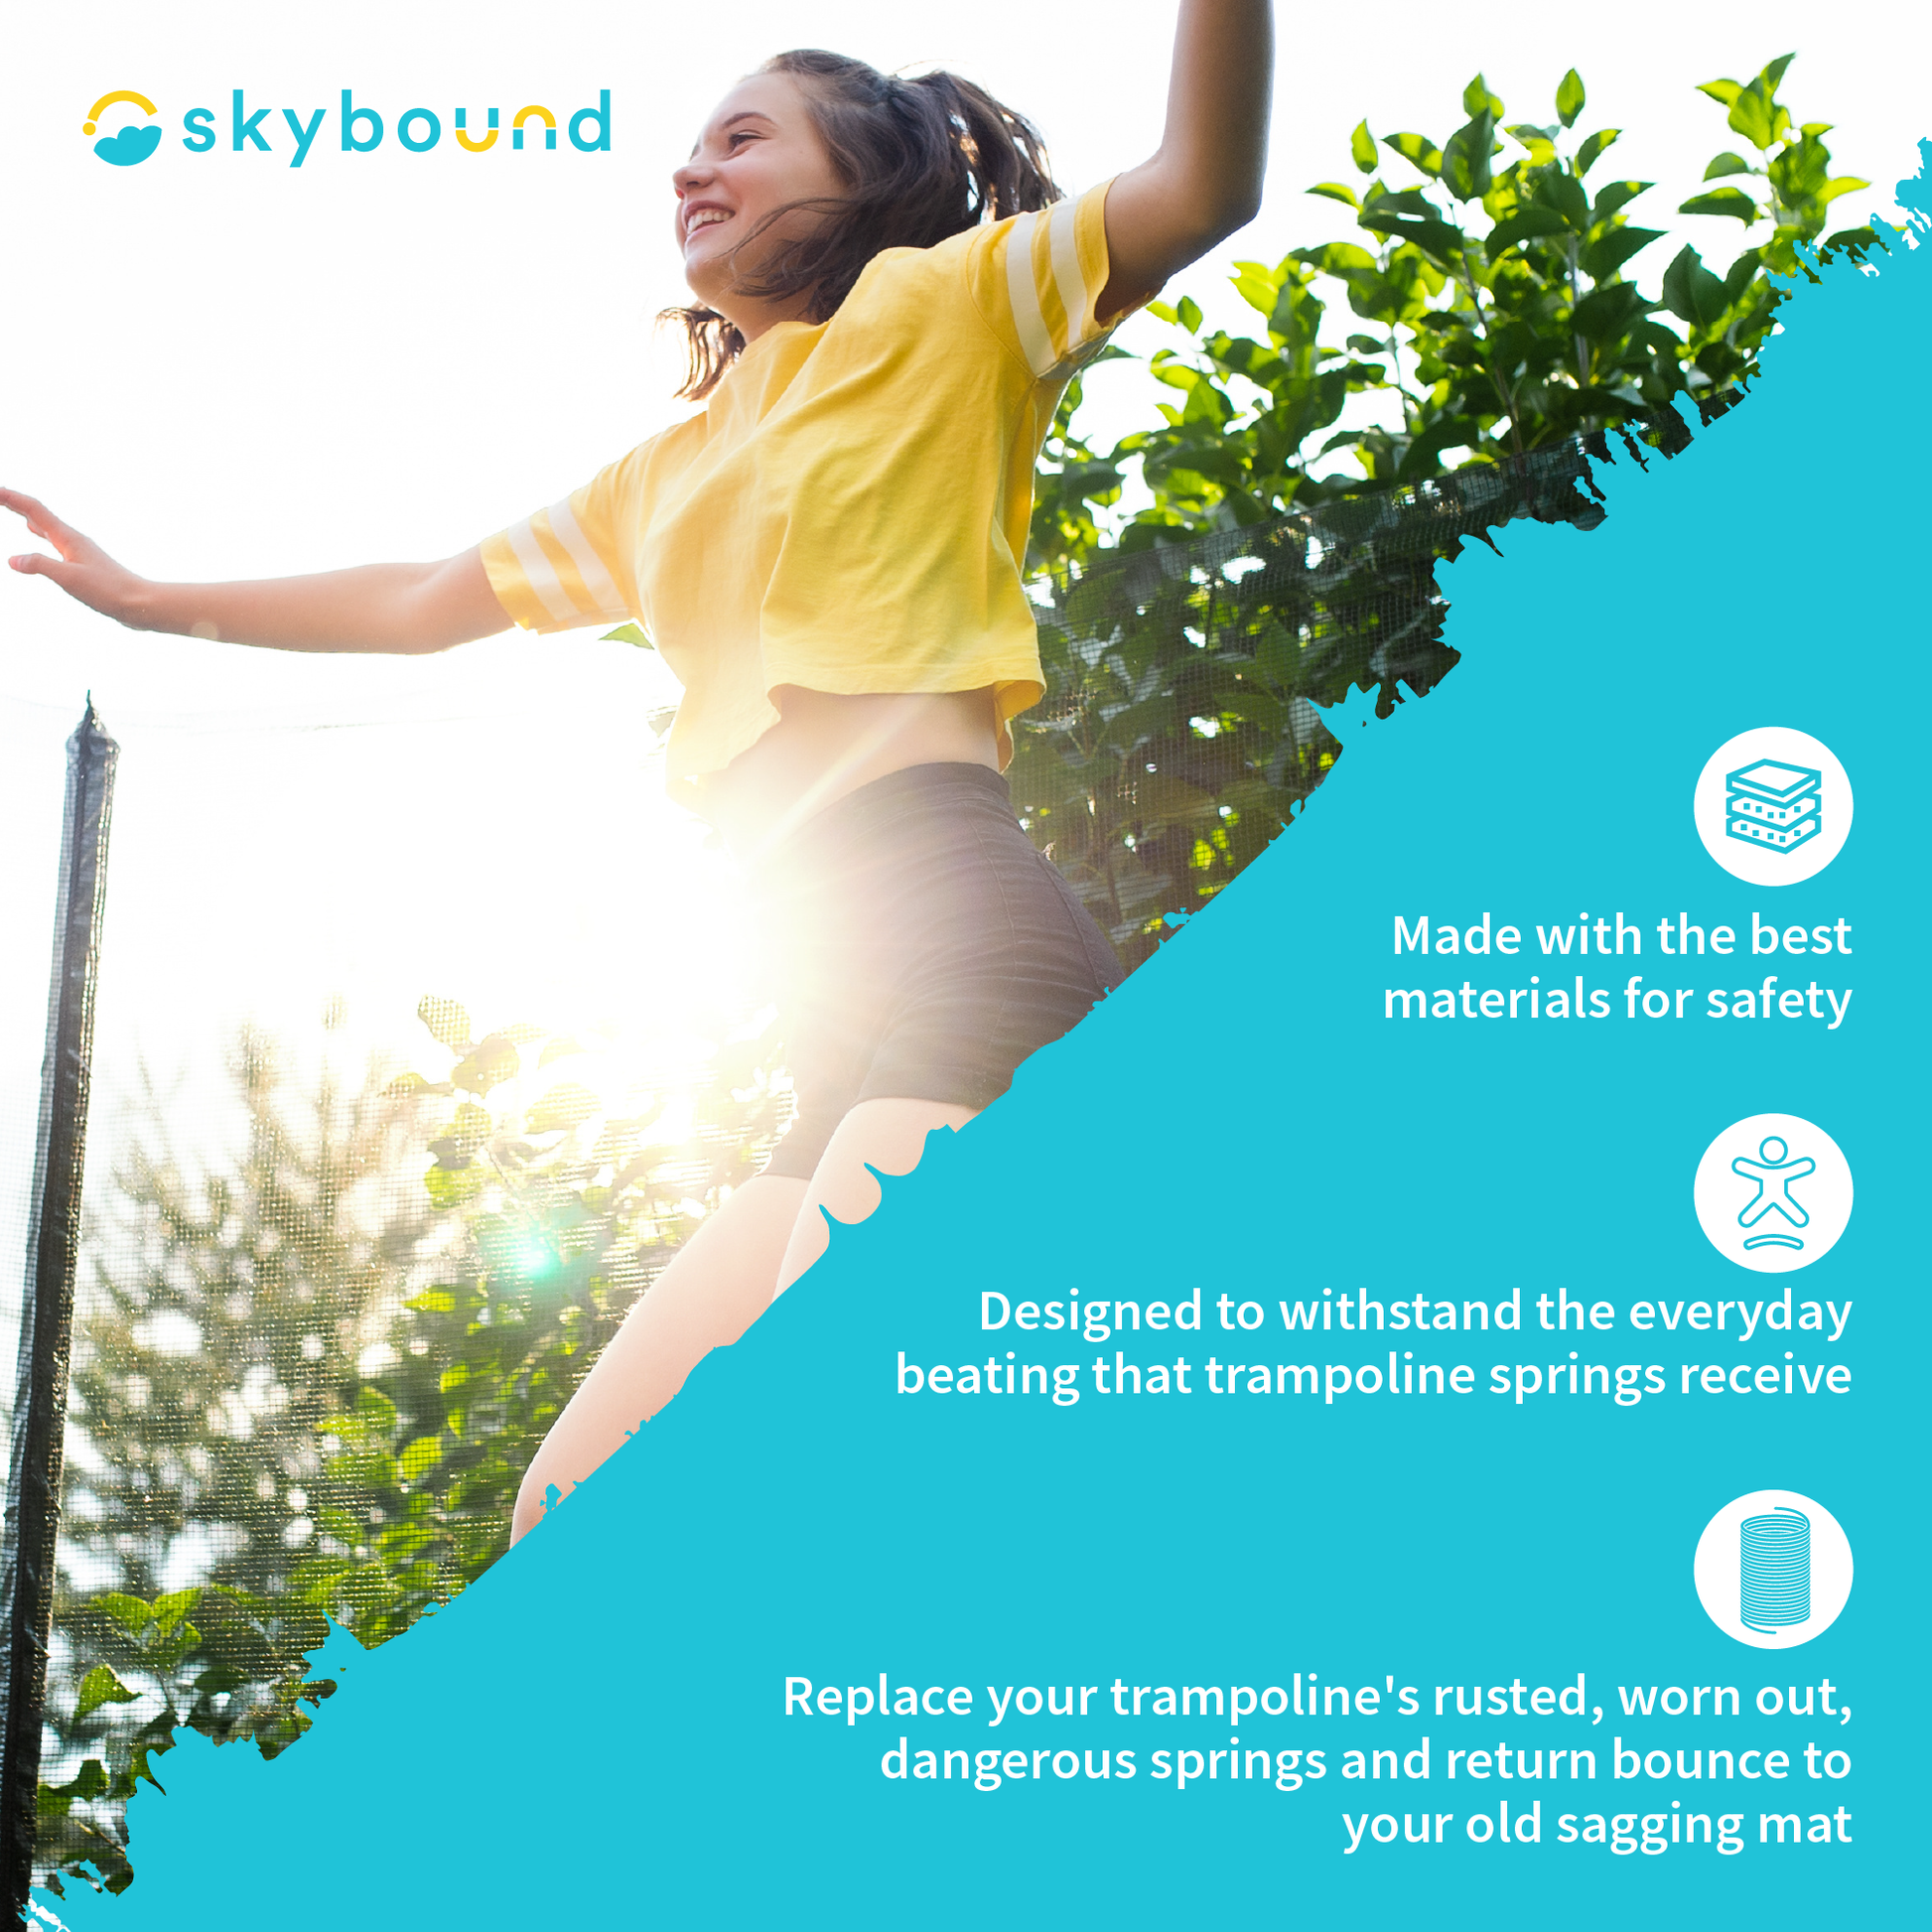 SkyBound: SkyBound products are Made with the best materials for safety.  Designed to withstand the everyday beating that trampoline springs receive.  Replace your trampoline's rusted, worn out, dangerous springs and return bounce to your old sagging mat.  